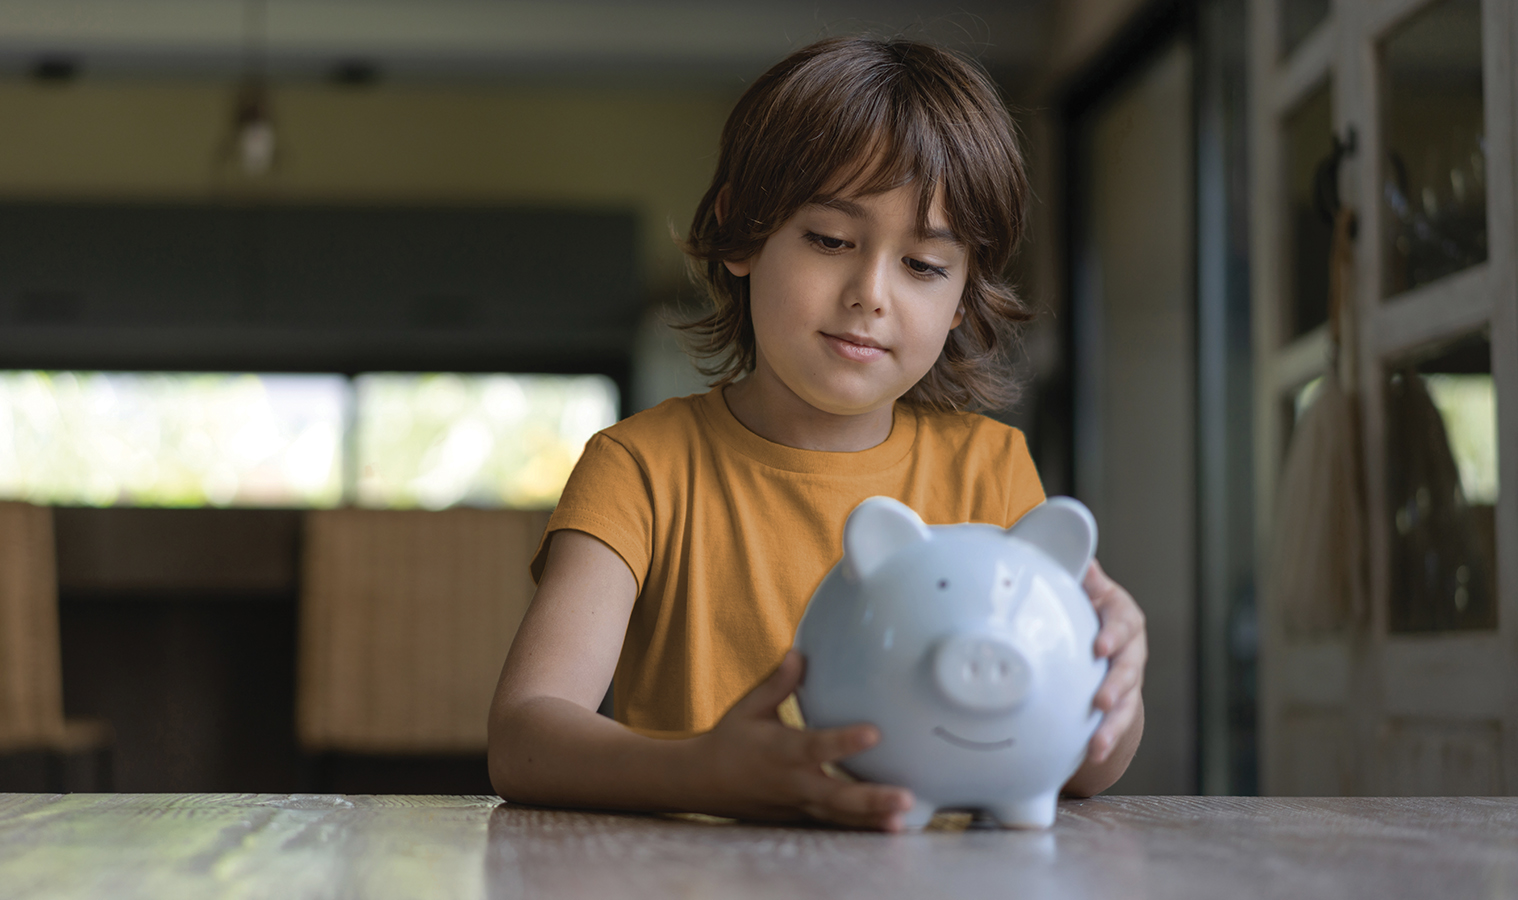 A small child putting money into a piggy bank